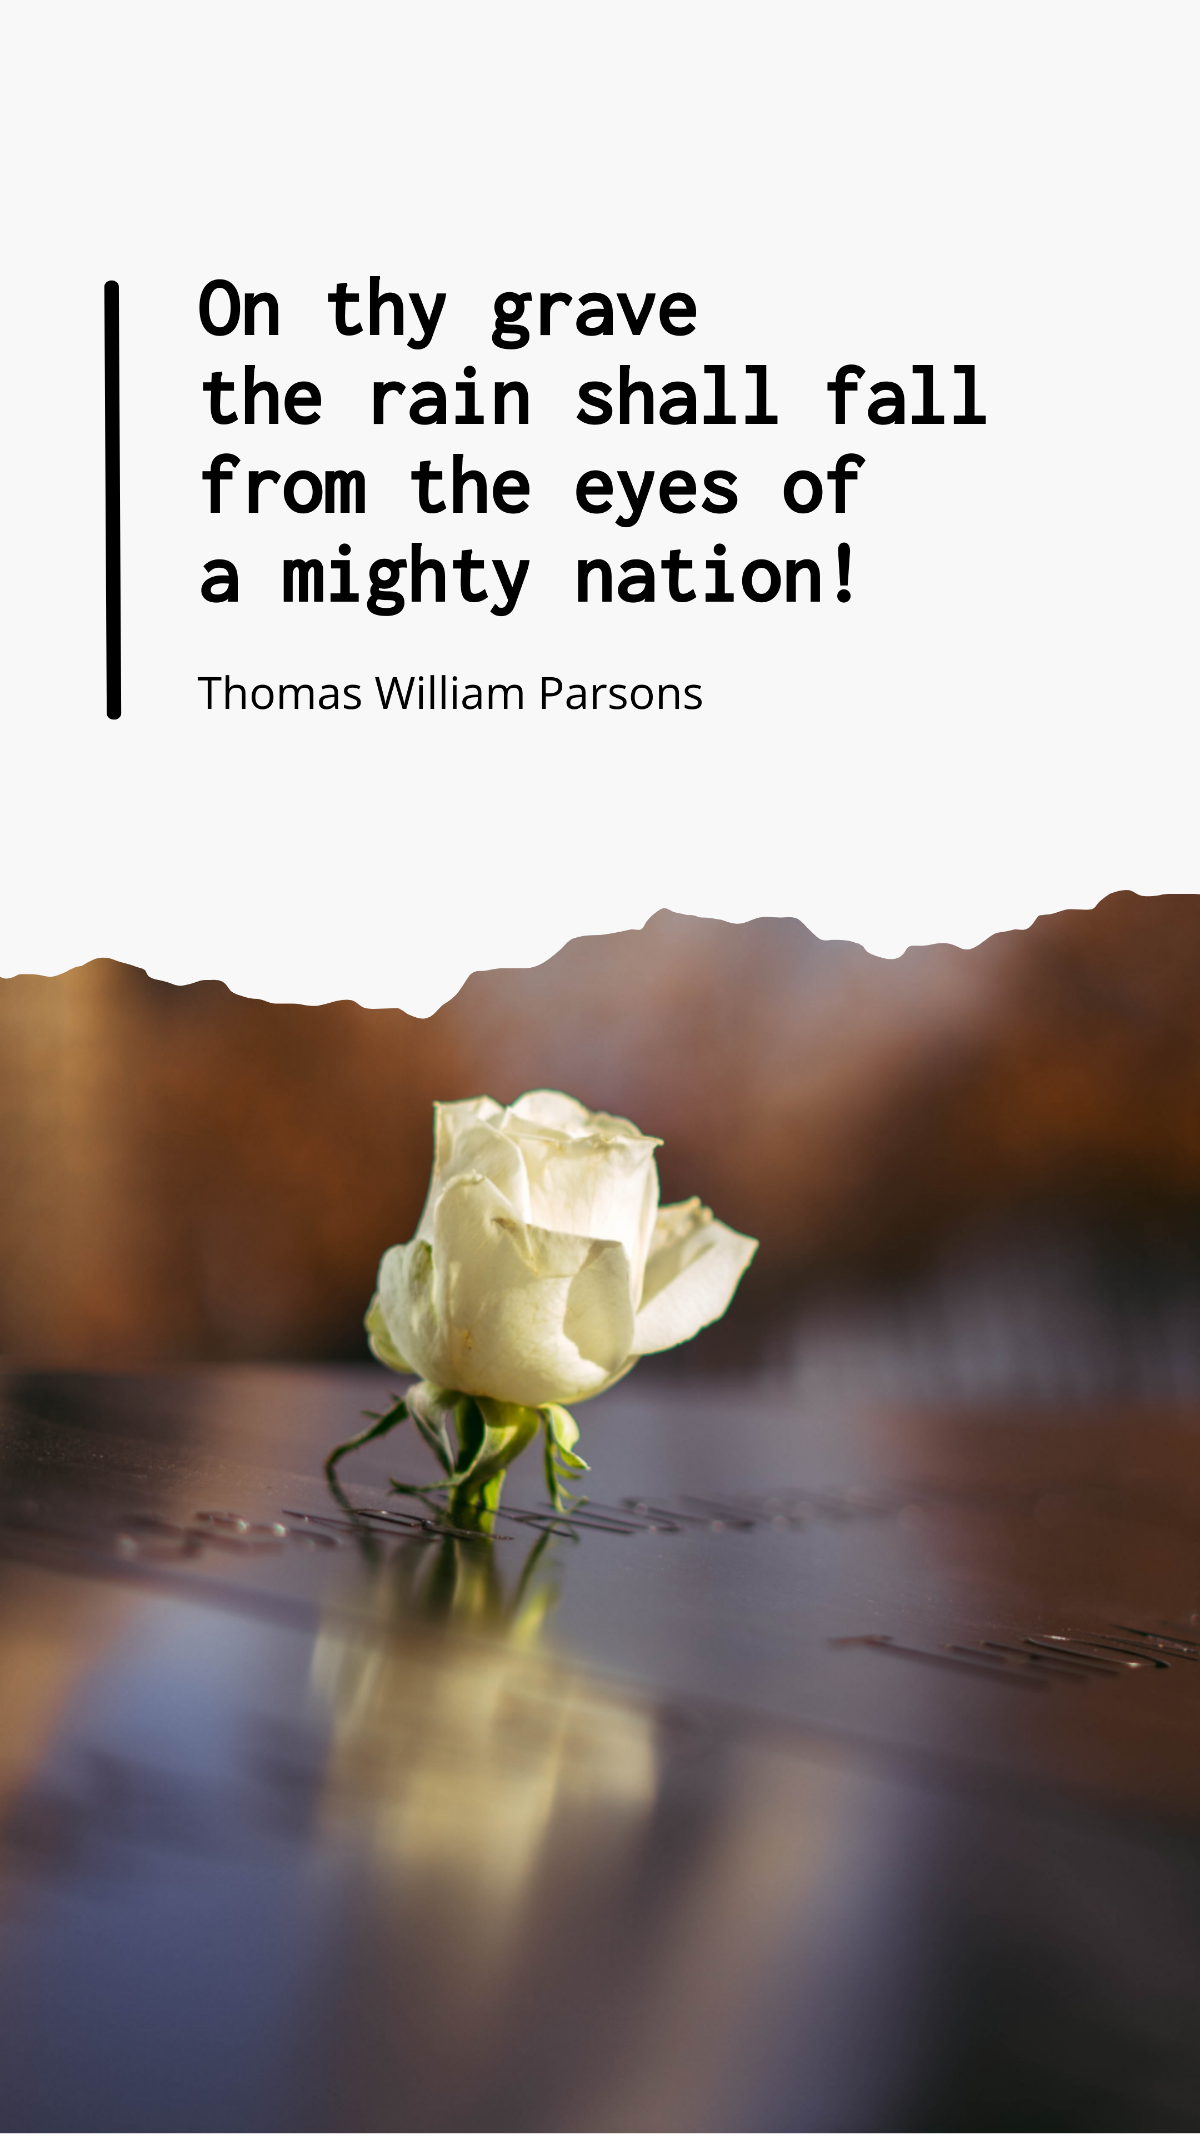 Thomas William Parsons - On thy grave the rain shall fall from the eyes of a mighty nation! Template